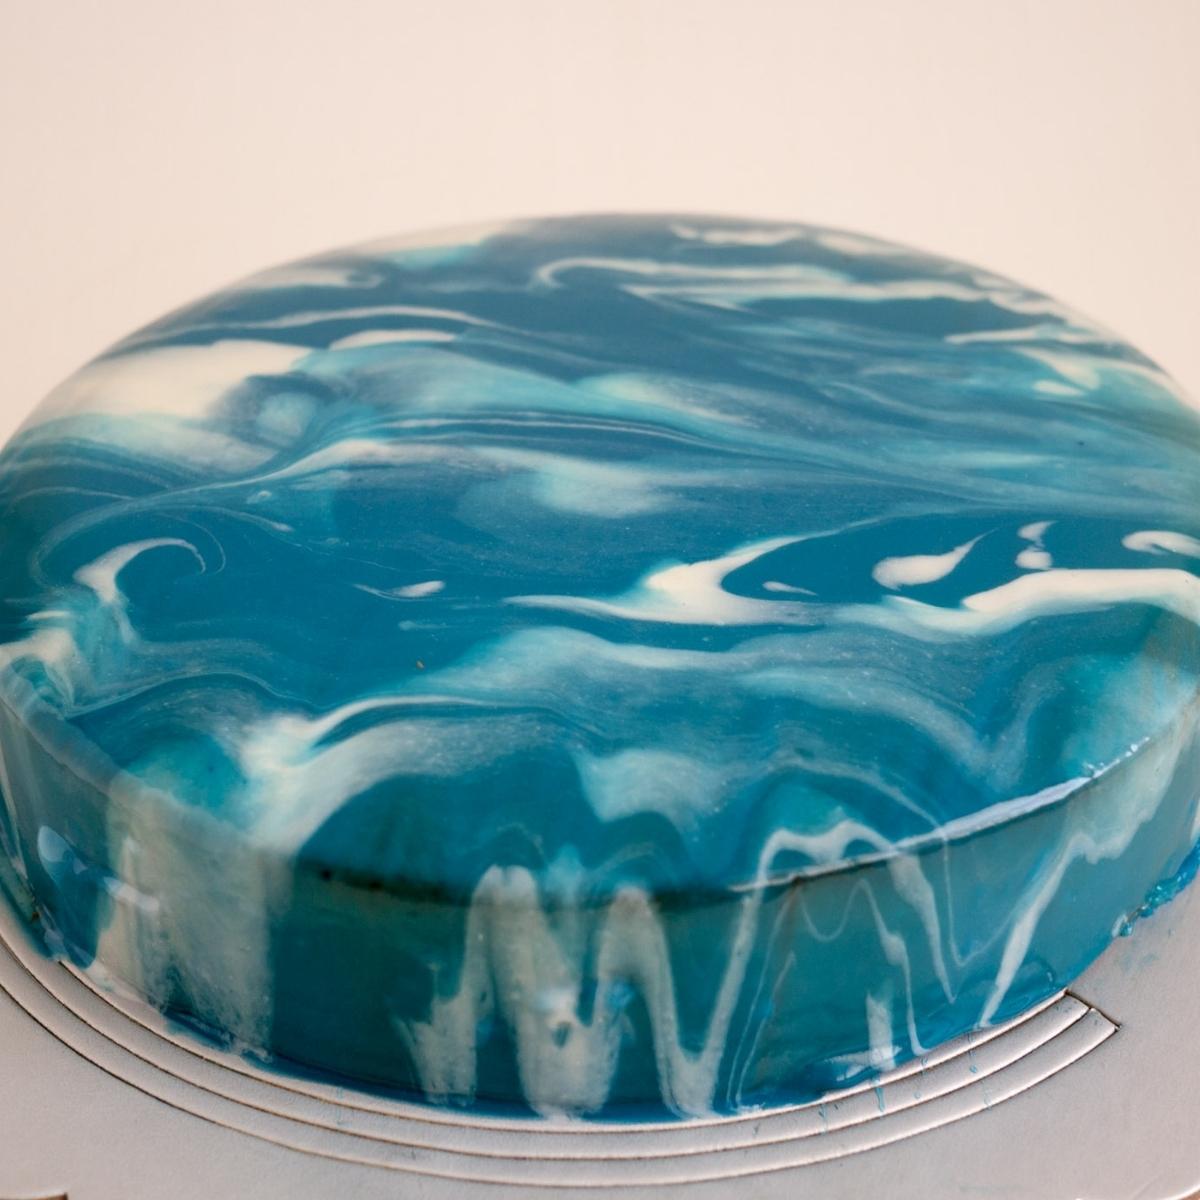 A mousse cake with mirror glaze on cake board.